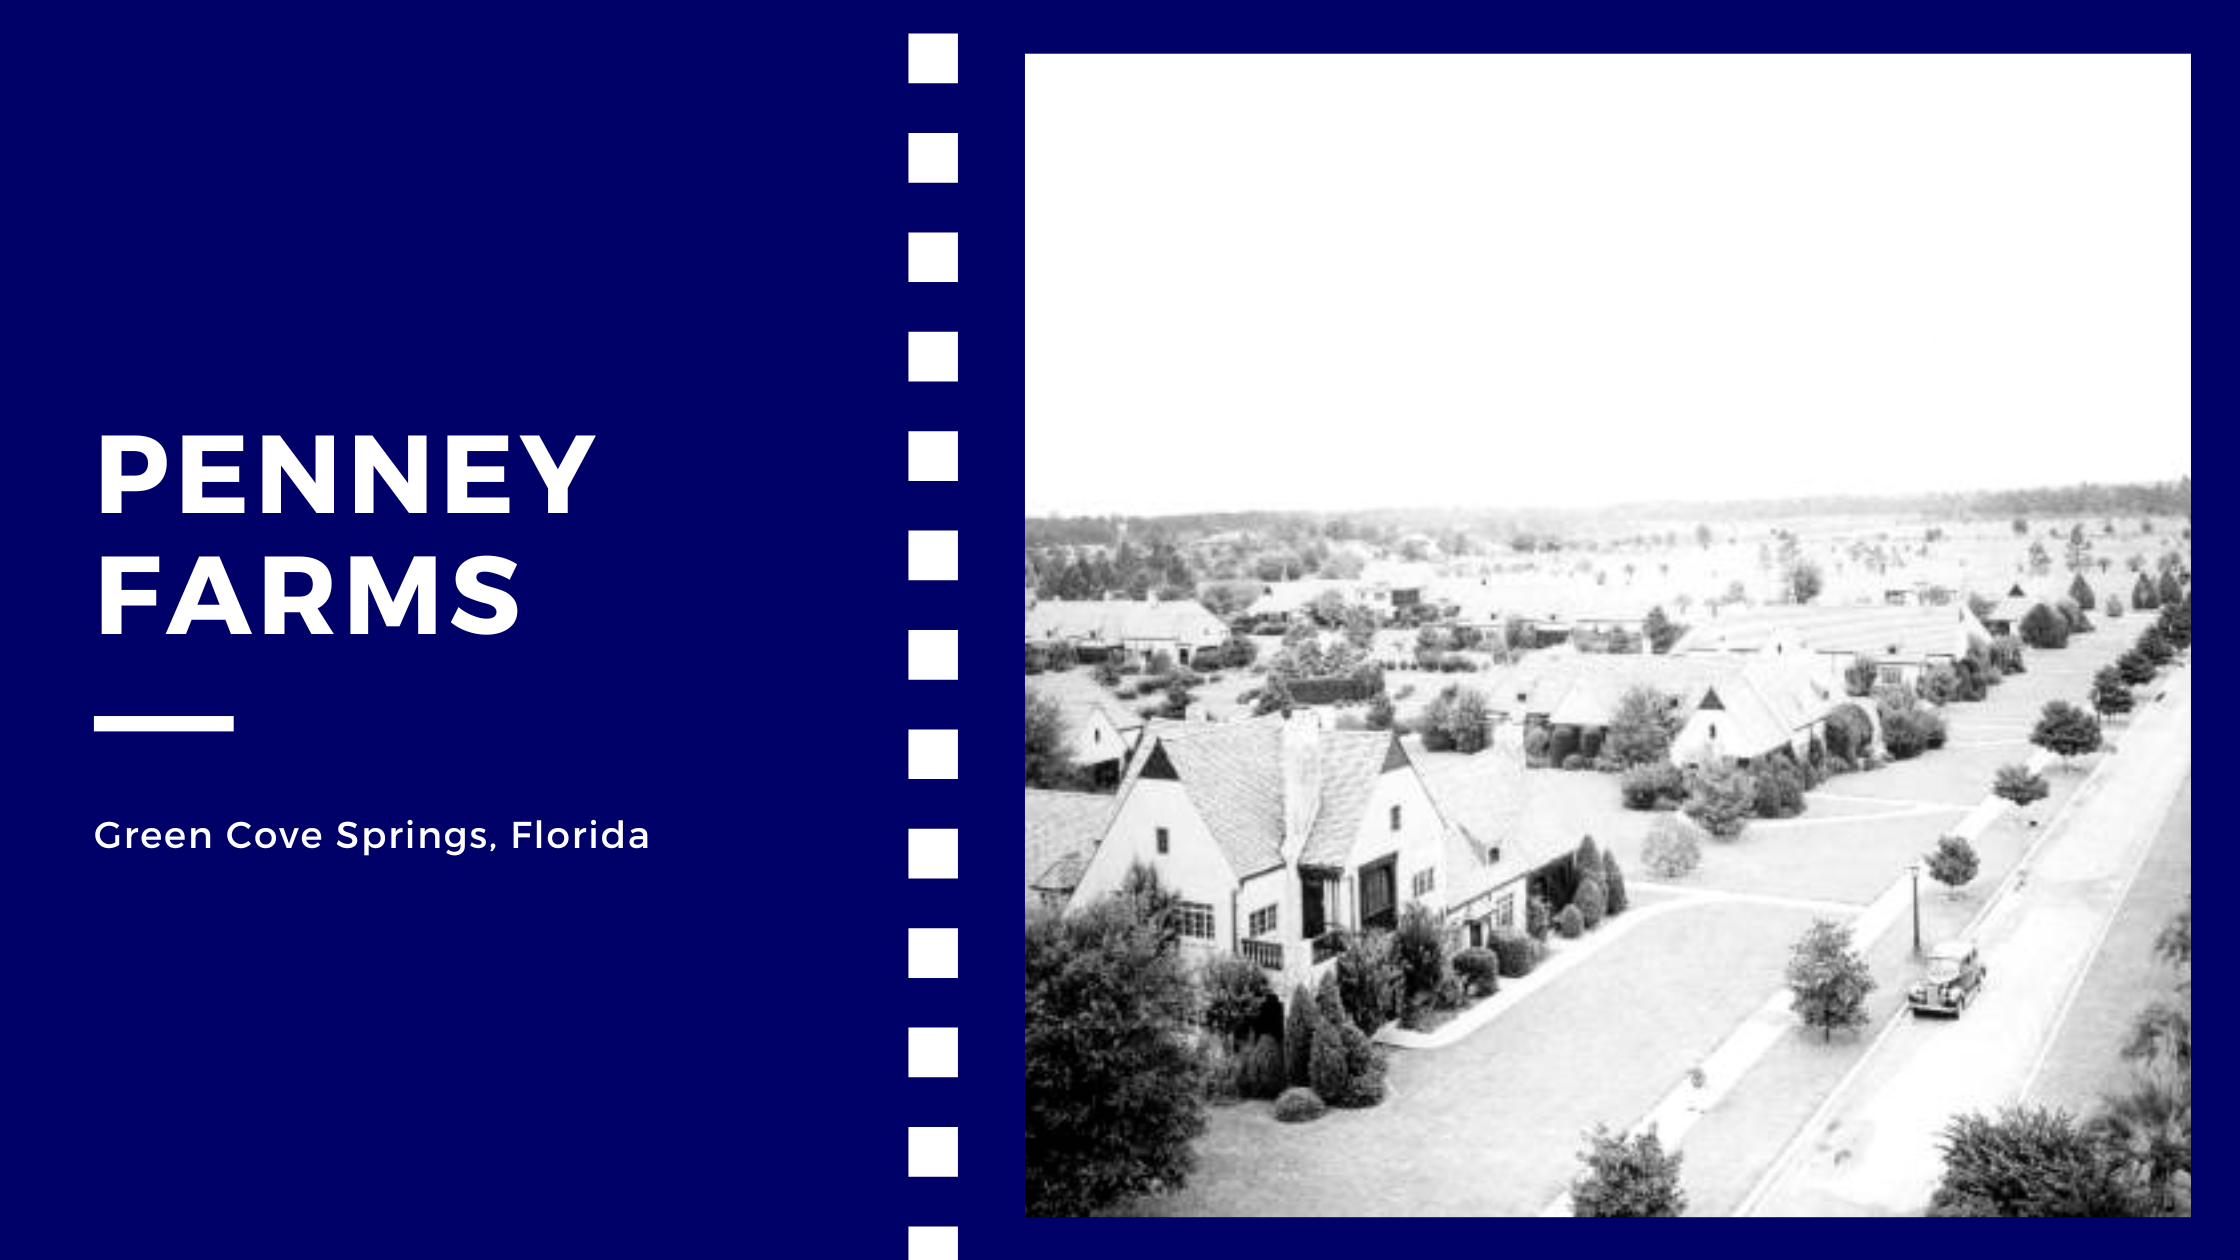 In 1922, Penney purchased 120,000 acres of farmland in Clay County, Florida, near Green Cove Springs. His plan was to develop a model farming community where farmers would be given 40 acres of land.